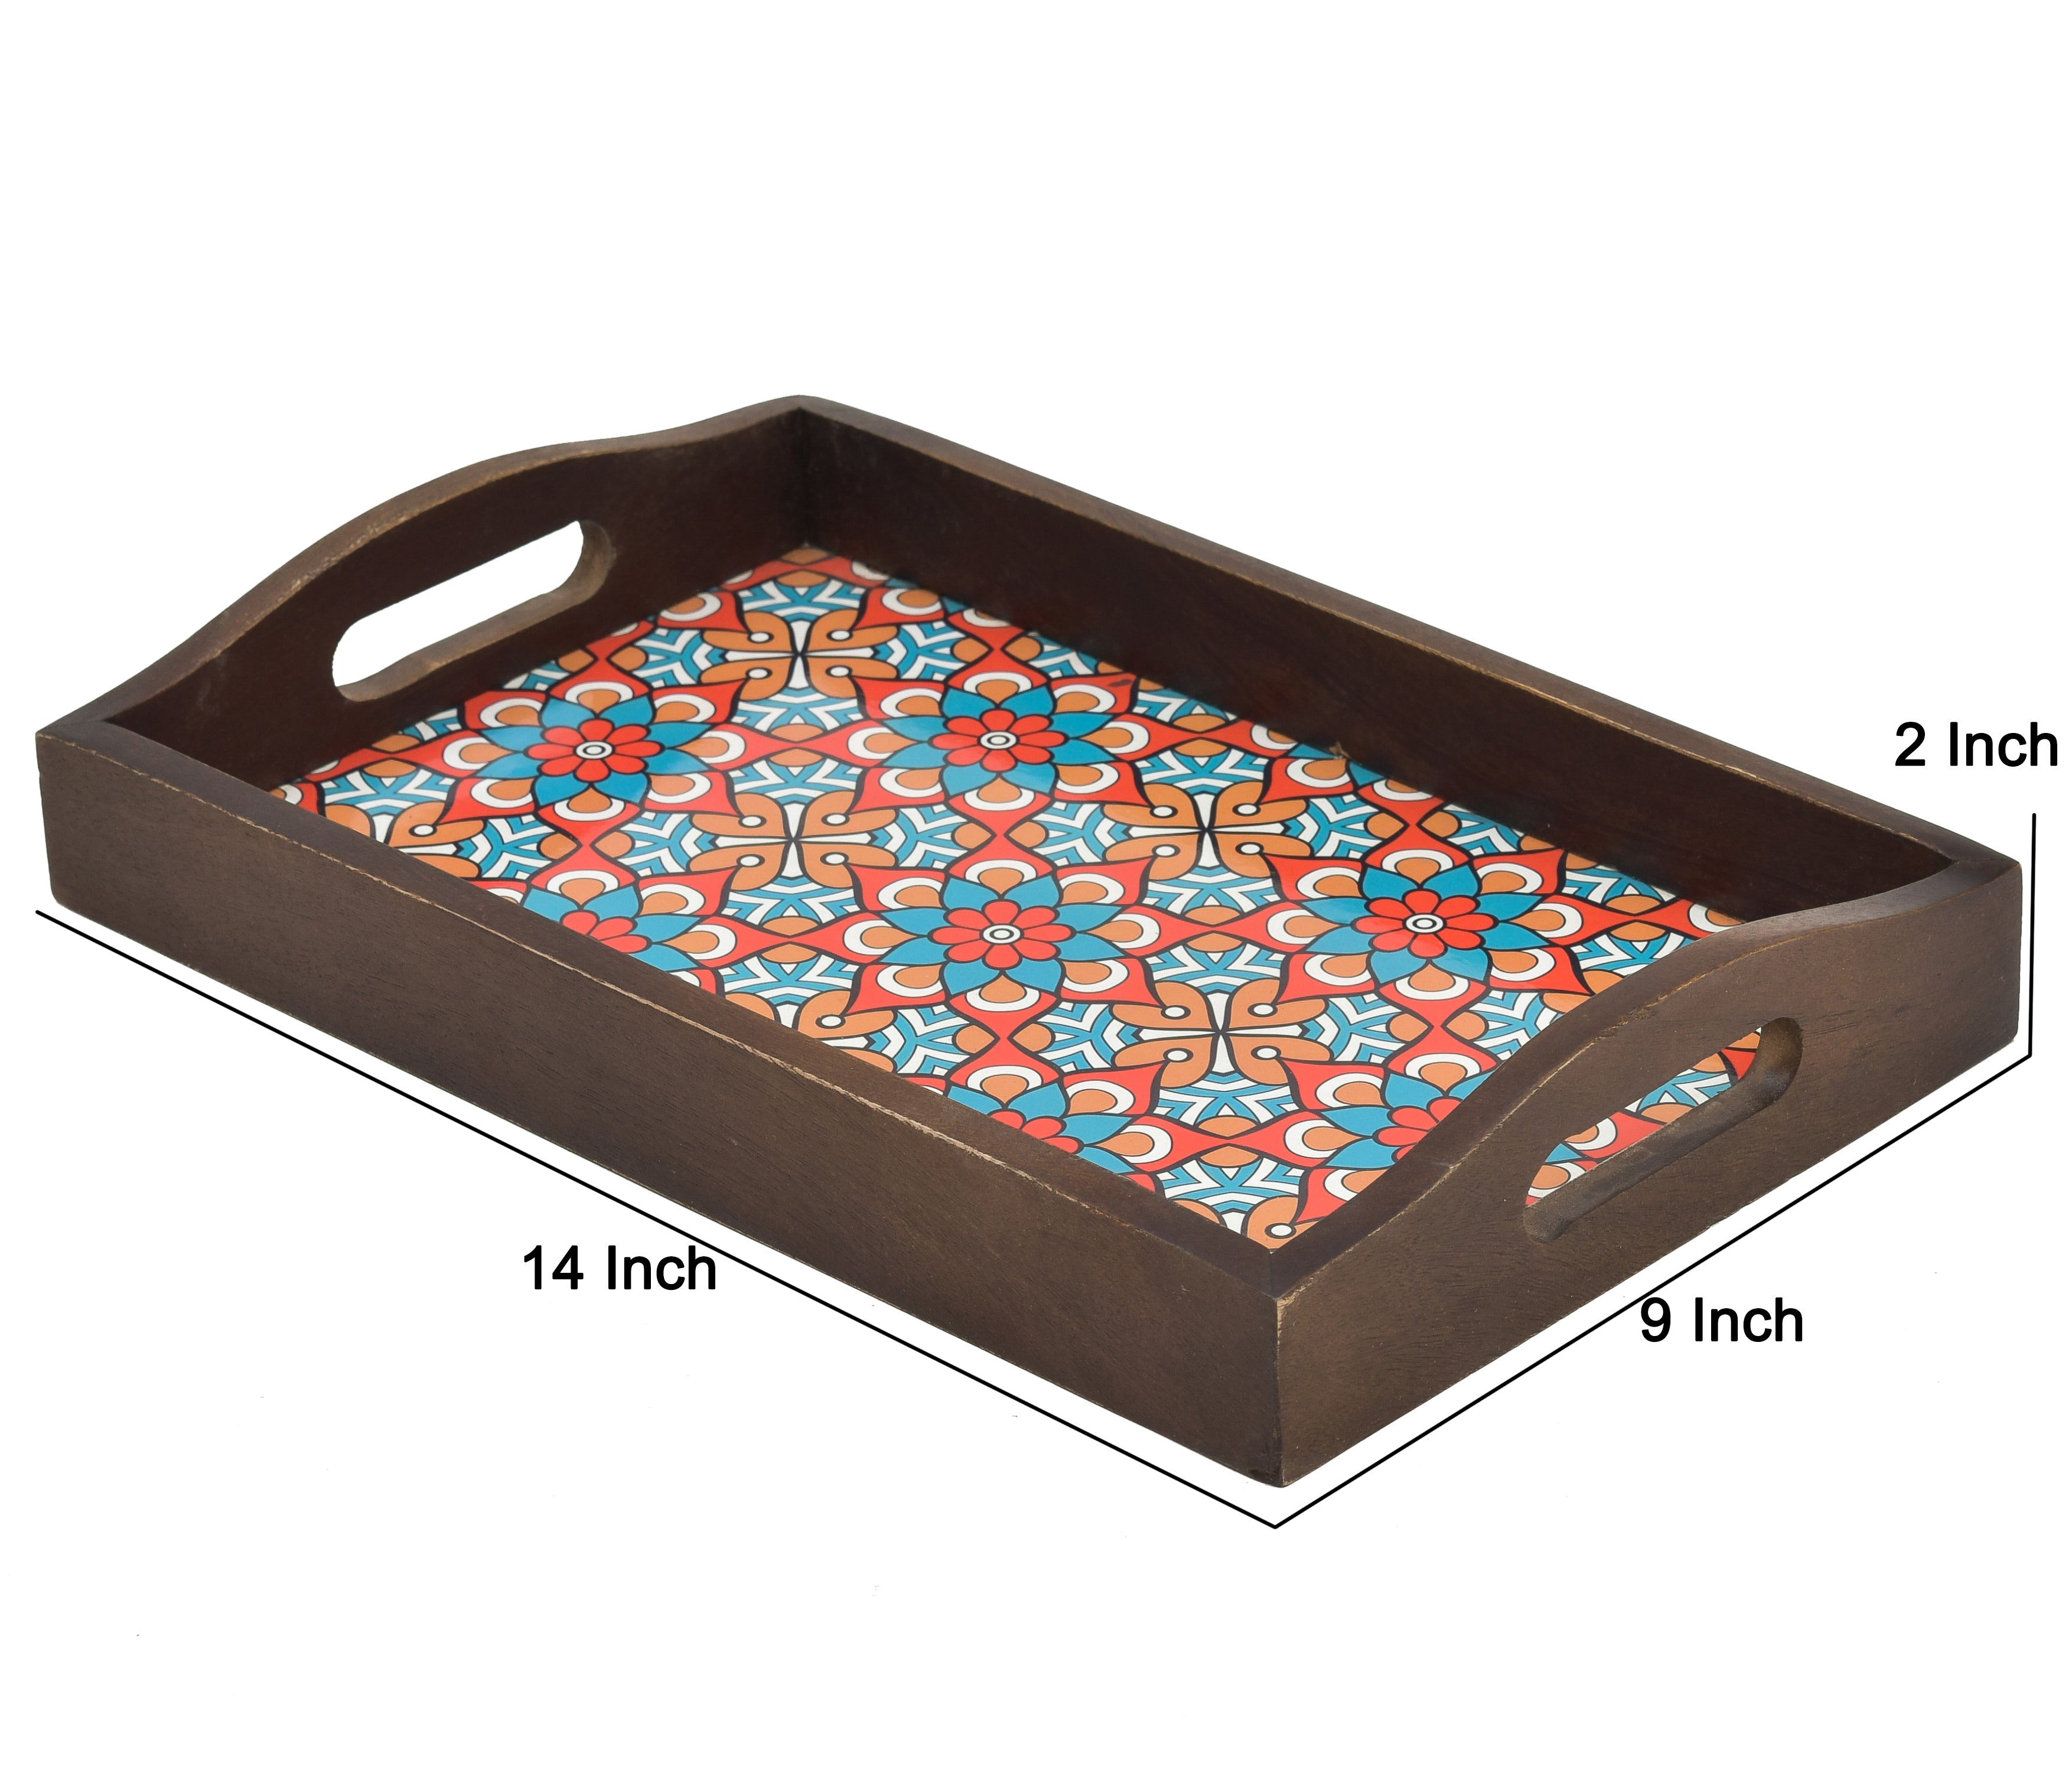 BLUE FLORAL PRINTED WOODEN BROWN RECTANGLE SERVING TRAY